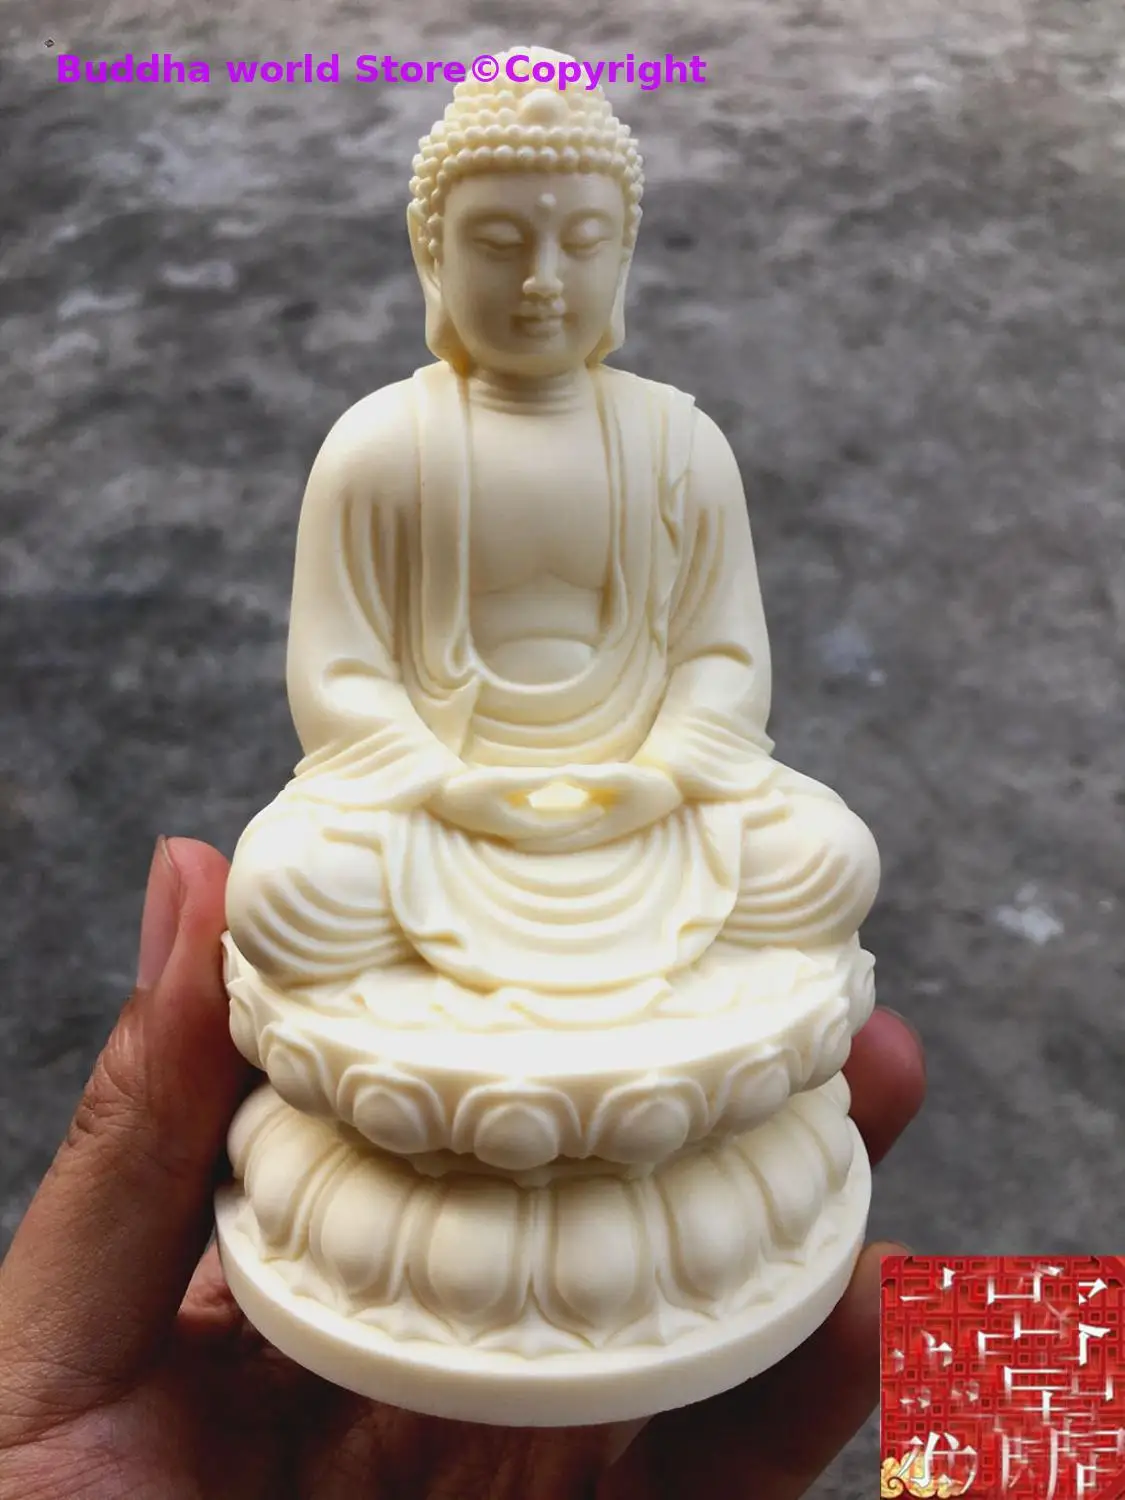 

HOME OFFICE Company SHOP CAR TOP Efficacious patron saint God Almighty RULAI Buddhist the buddha FENG SHUI Carving art statue